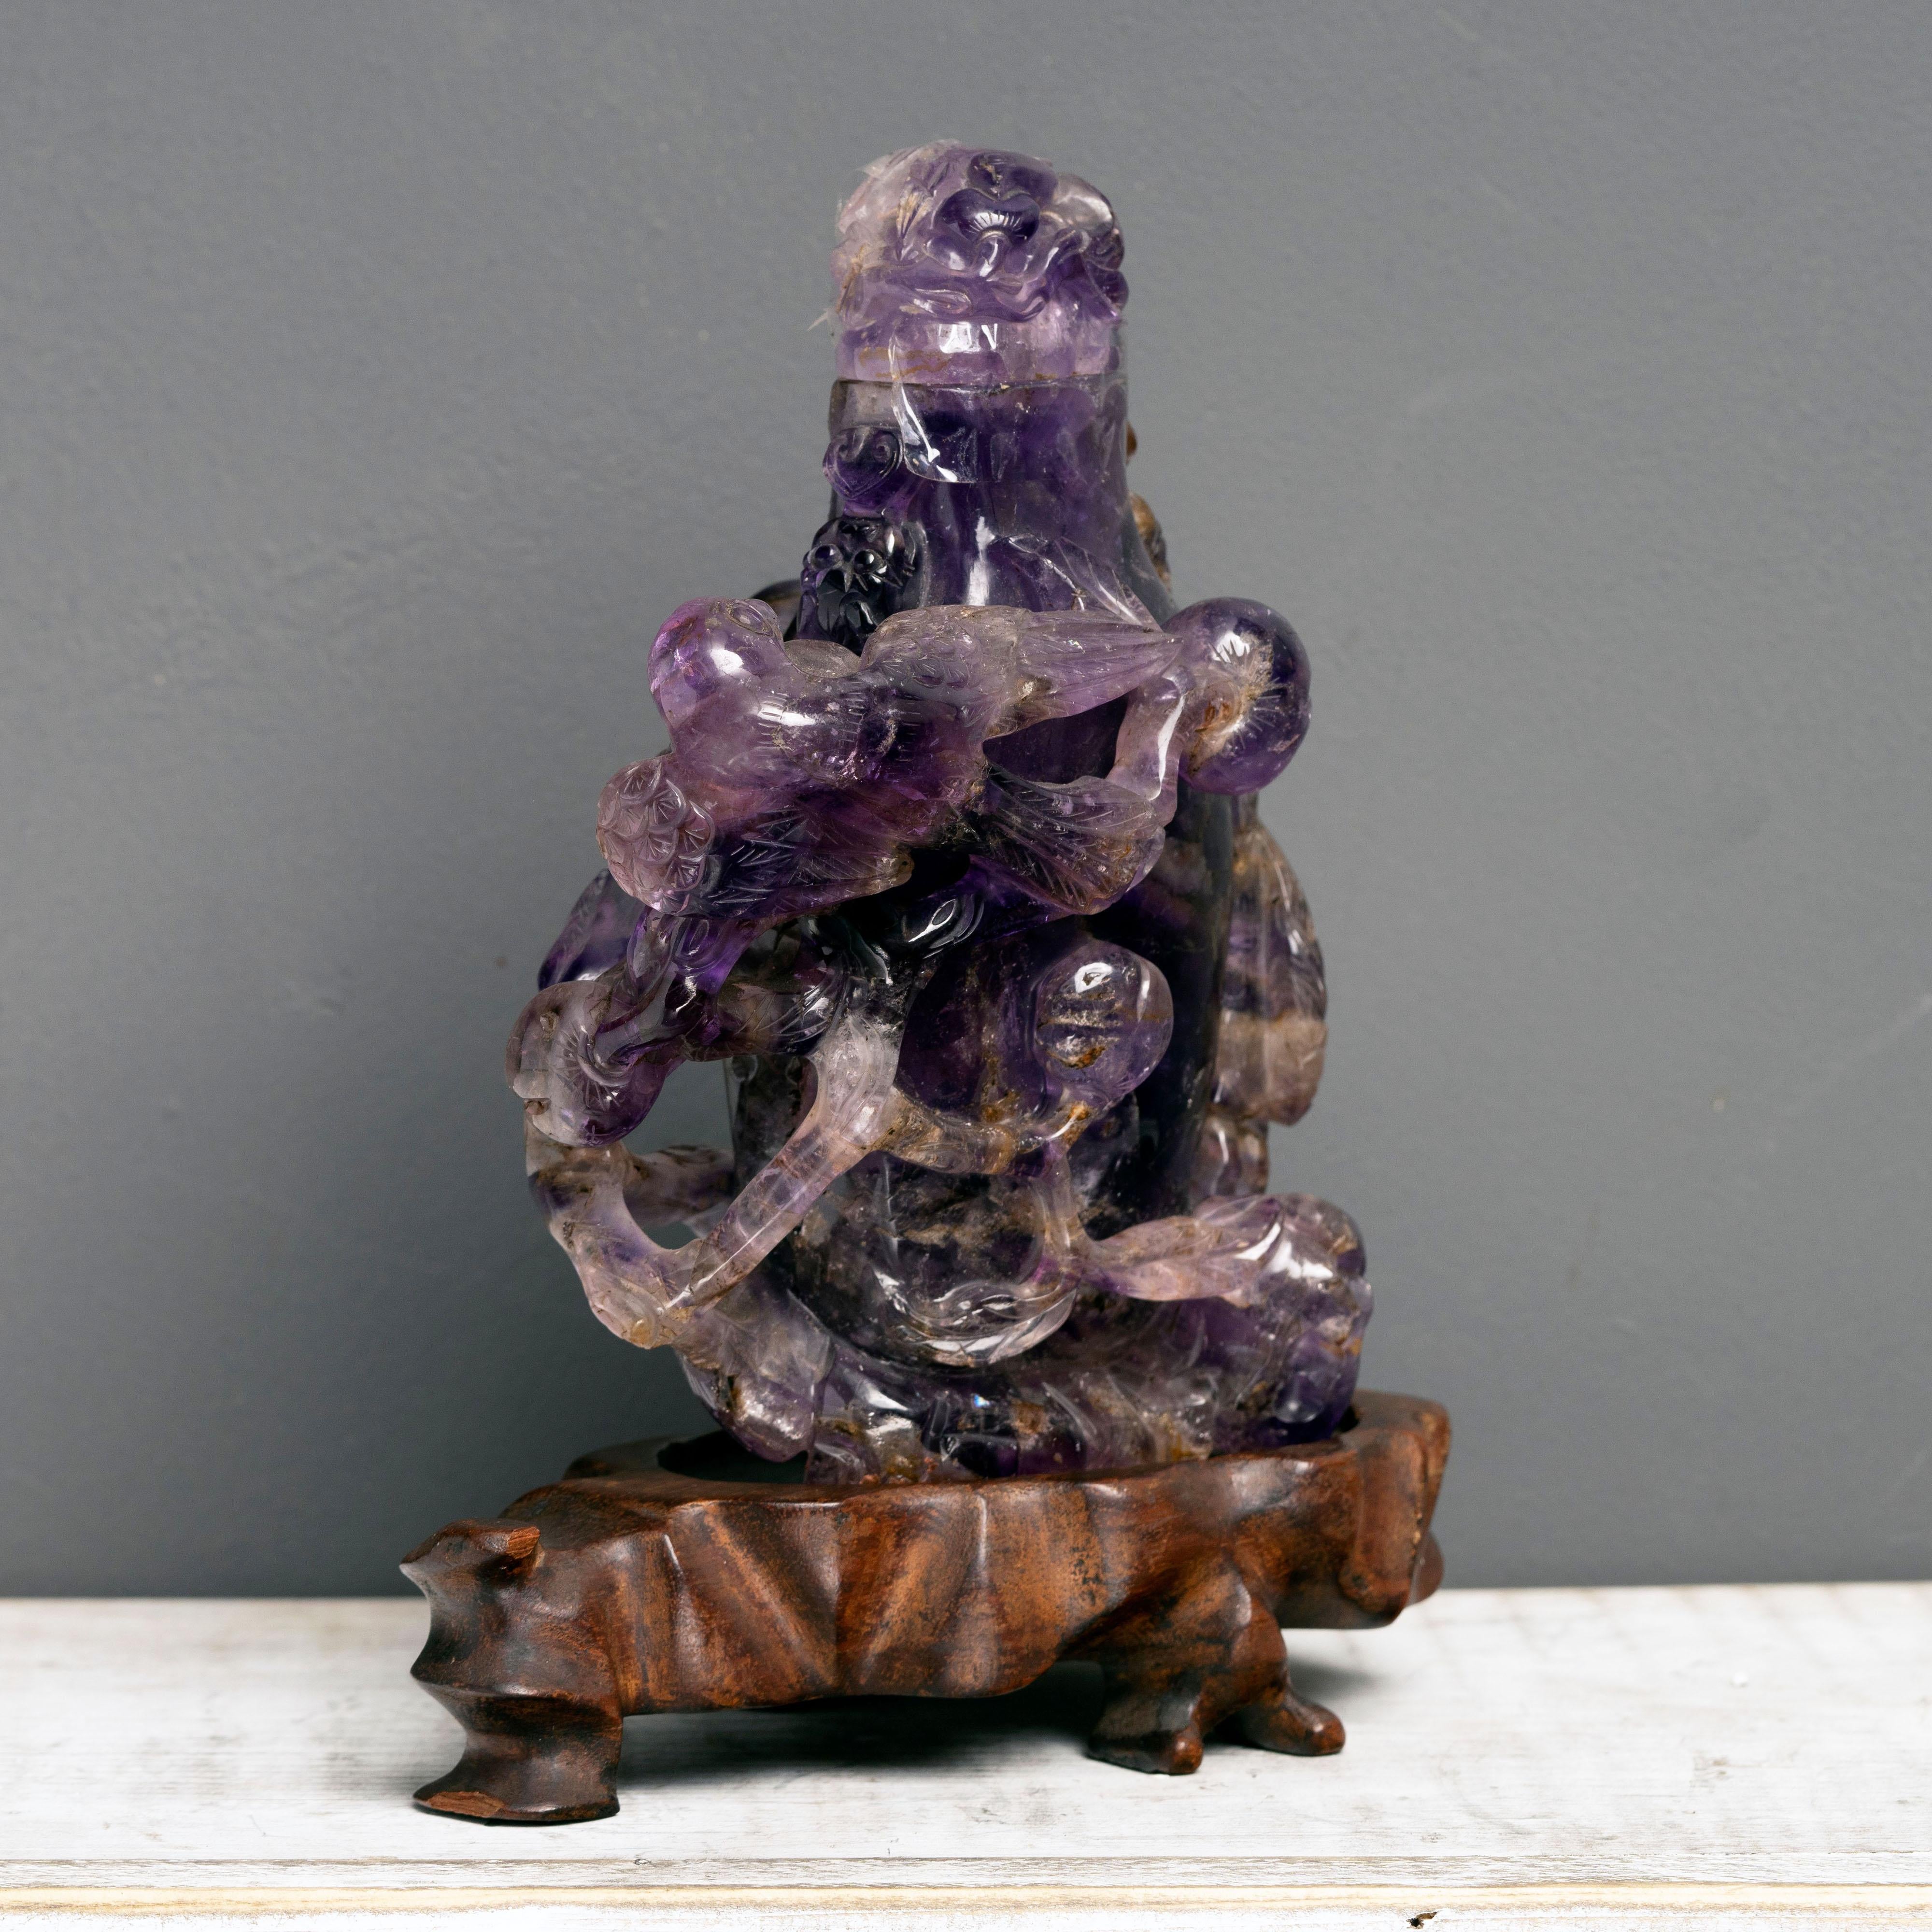 This stunning bottle delicately hand-carved complete with removable top out of one solid, gemmy, deep purple-to-clear piece of amethyst comes on a custom carved wooden base and boasts mythical imagery. Enjoy it as a sculpture or use it to store your